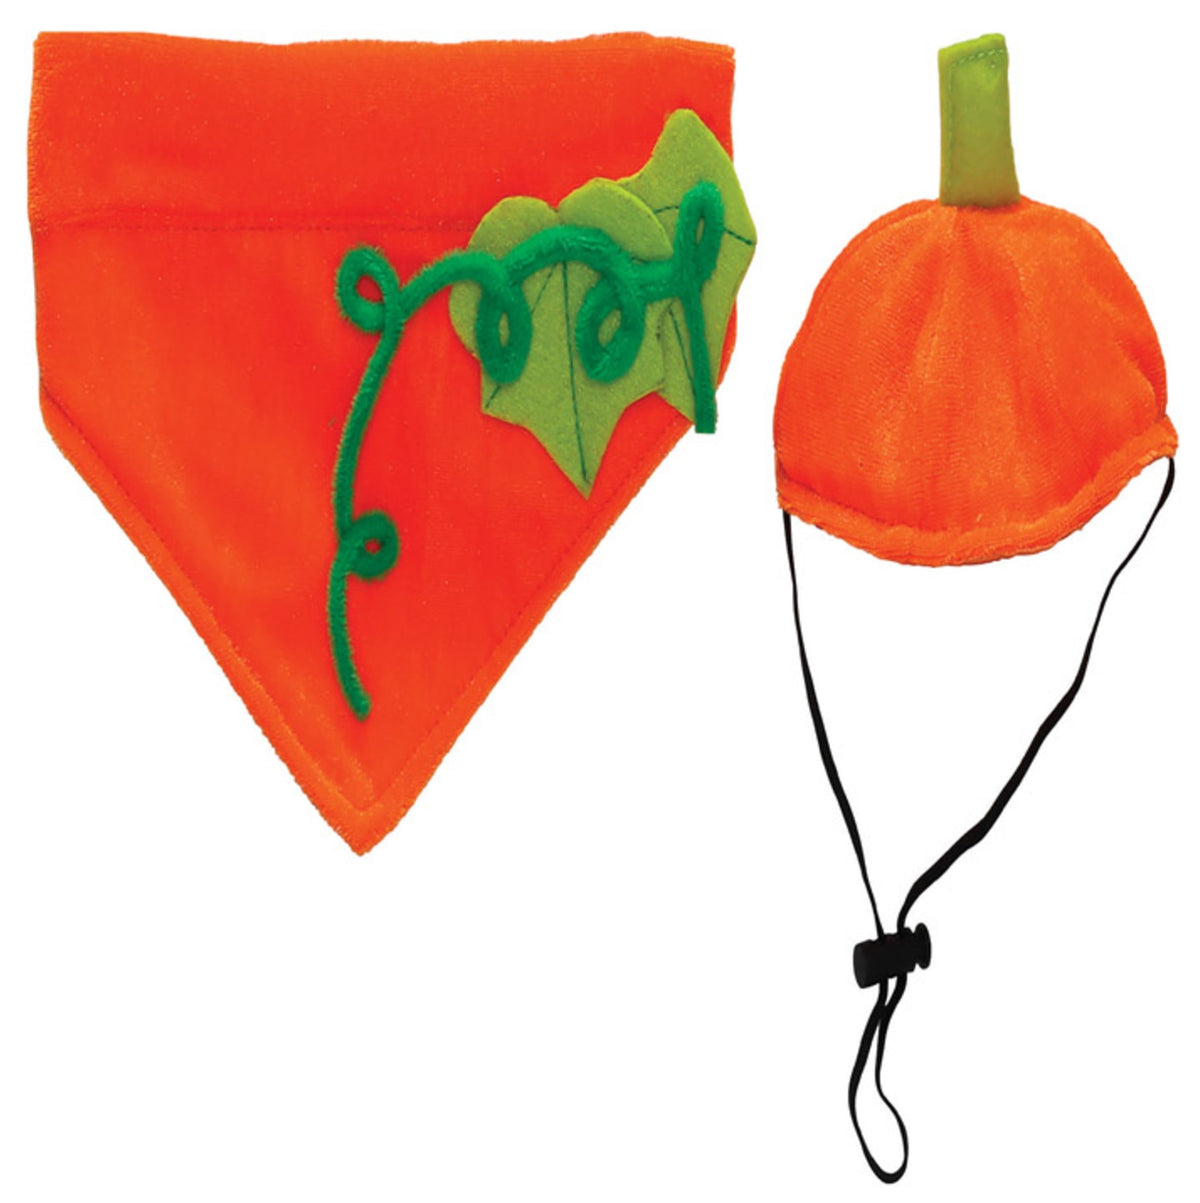 buy pumpkin , carving tool & halloween at cheap rate in bulk. wholesale & retail holiday gifting items store.